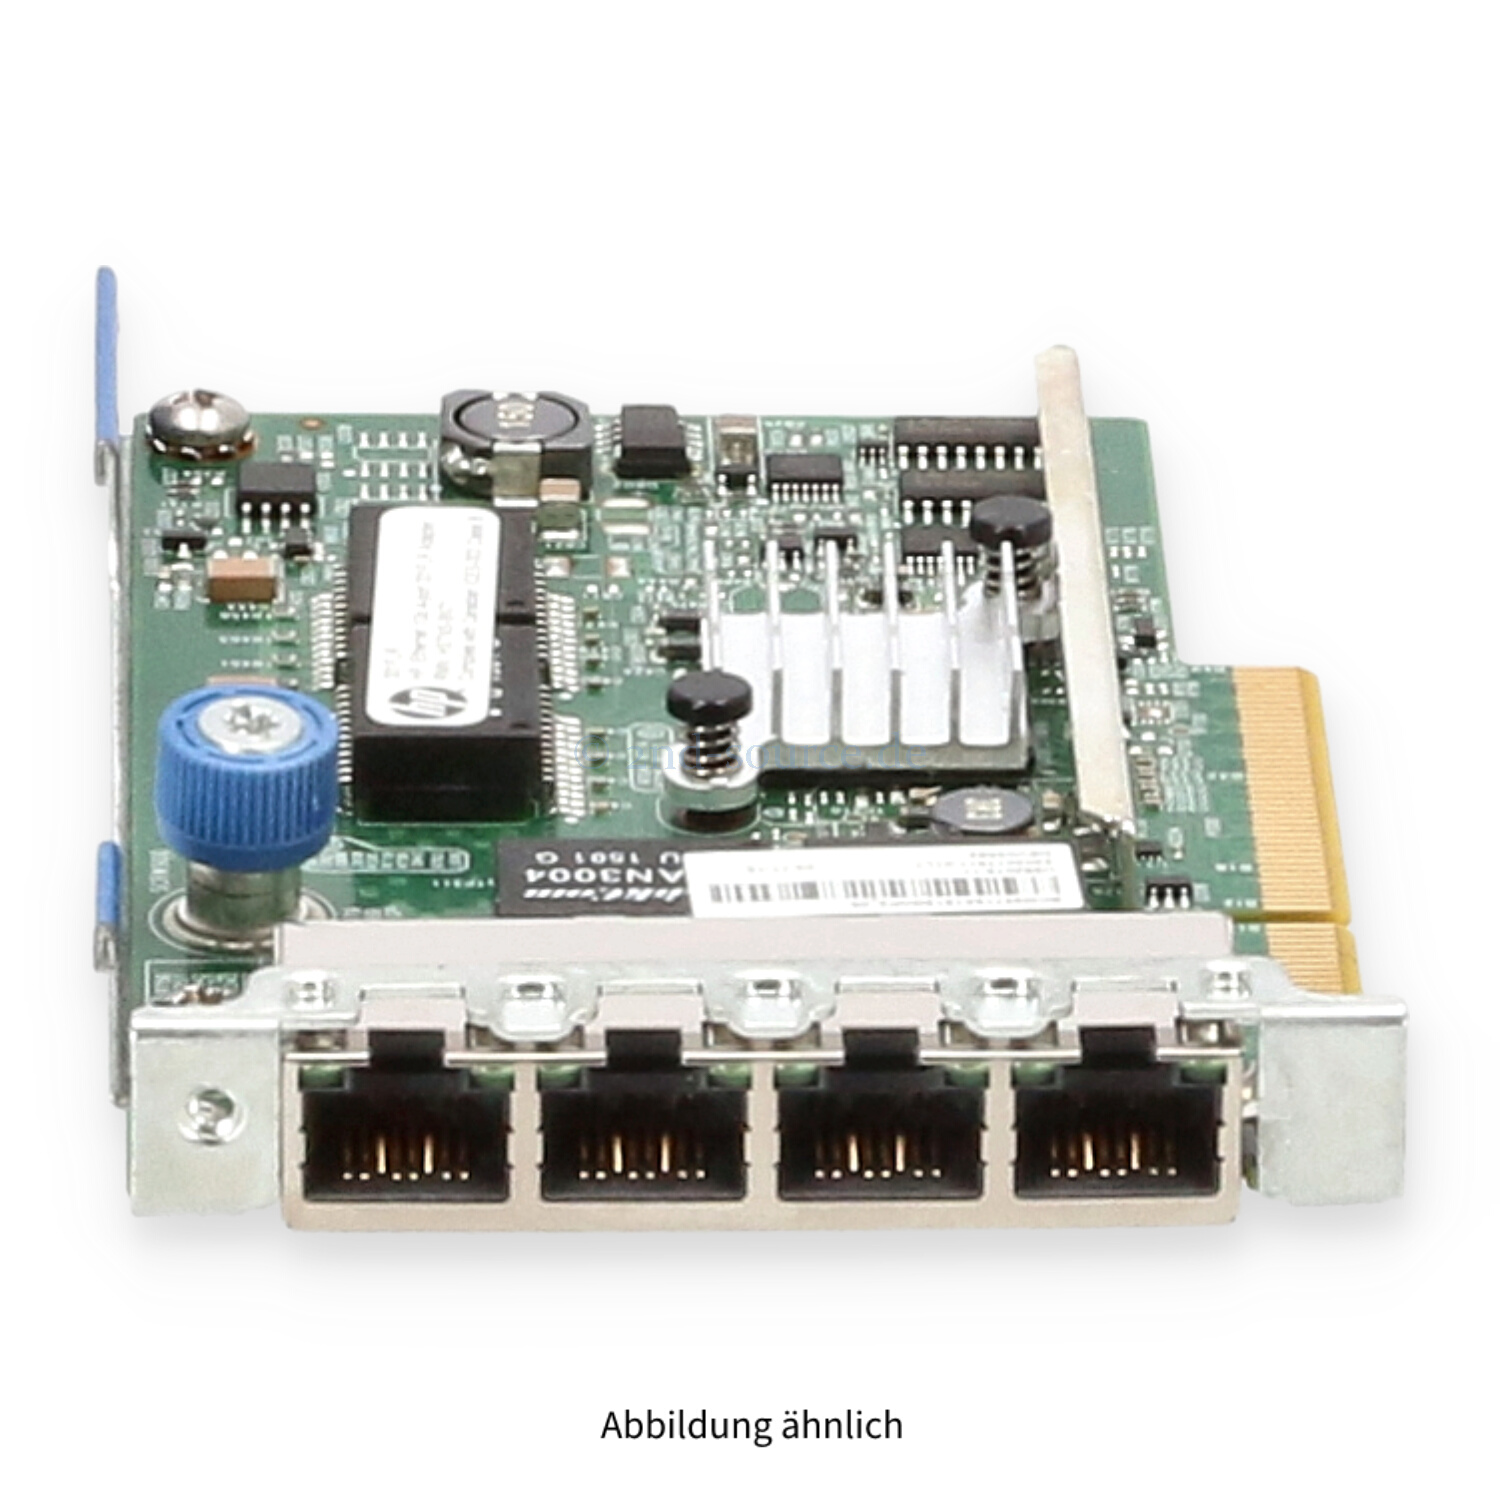 HPE 331FLR-T 4x 1GbE Server Ethernet Adapter 629135-B22 789897-001 629133-002